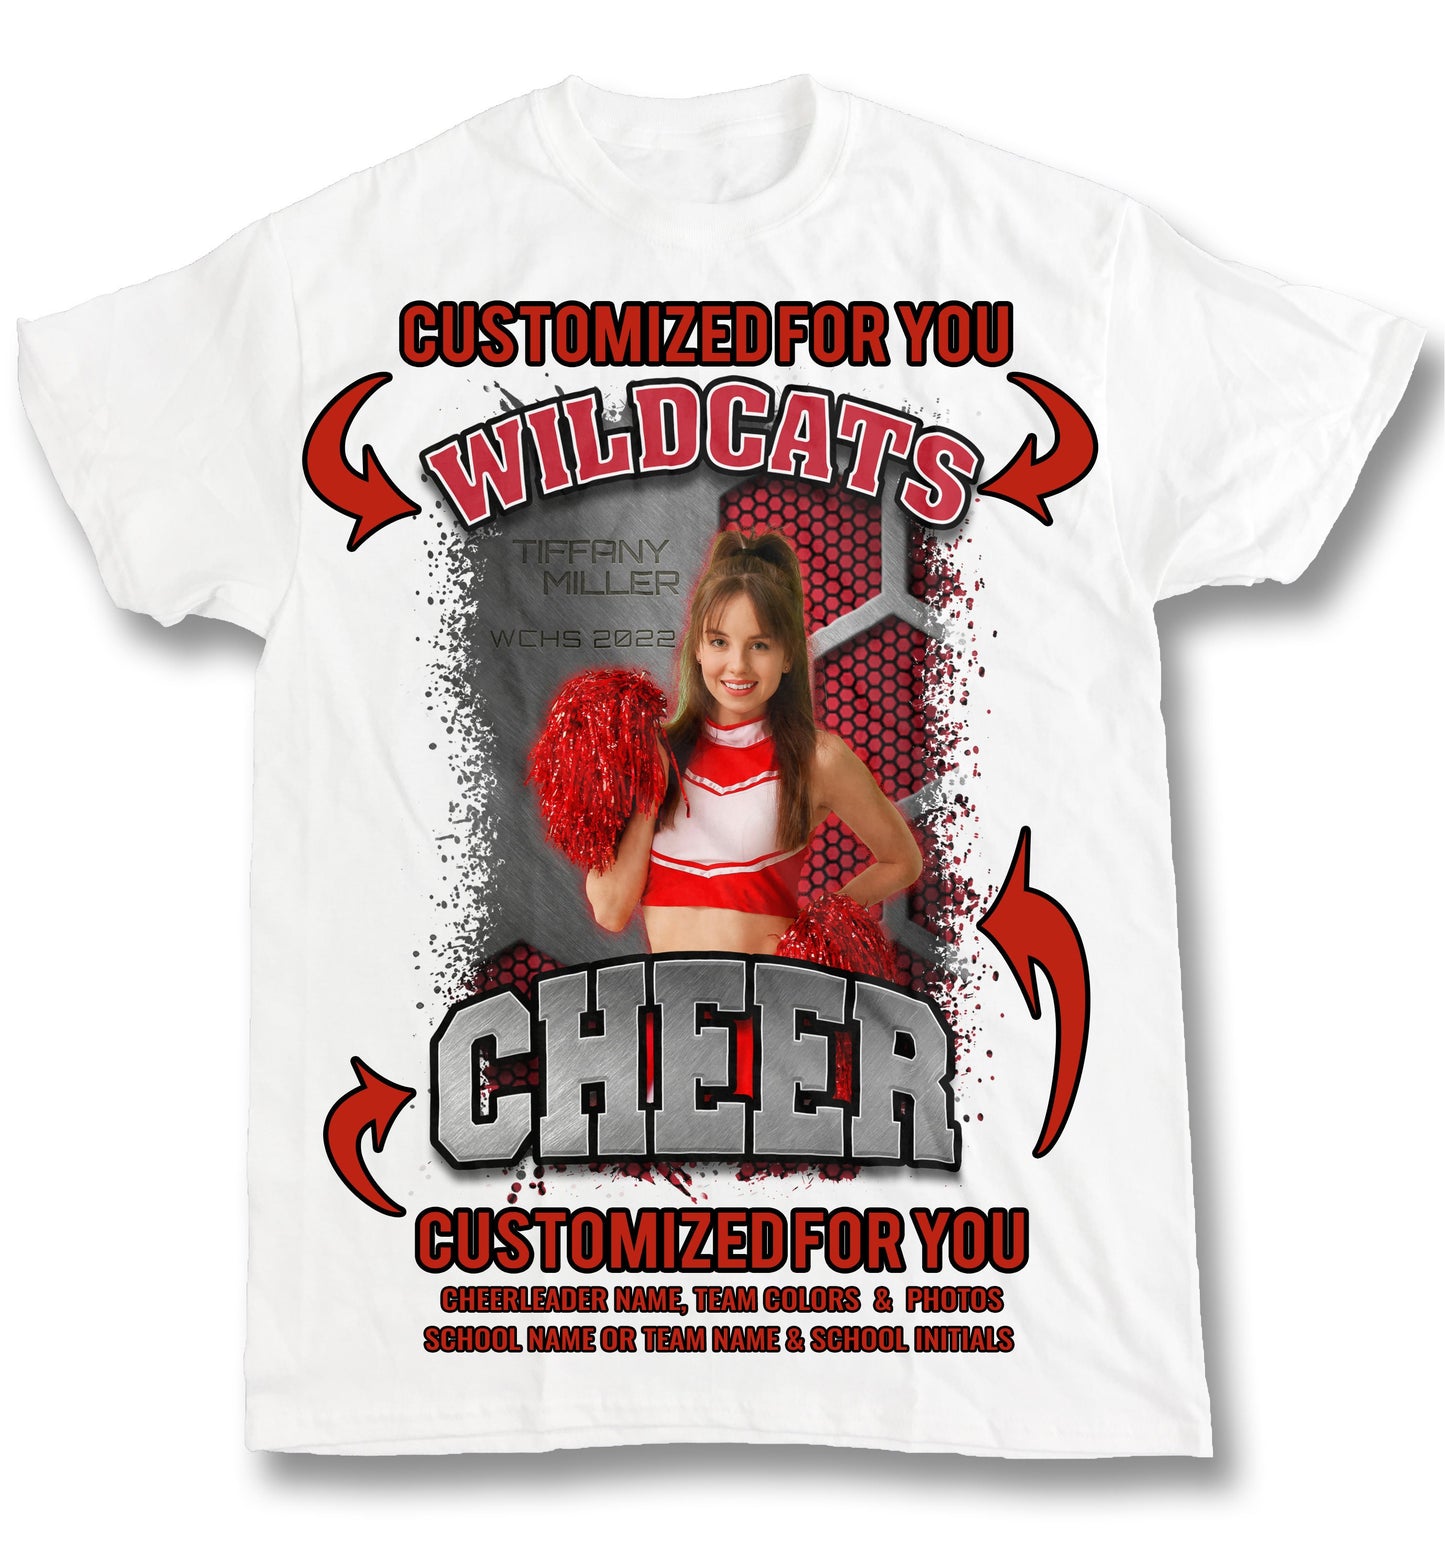 Custom Cheerleader Photo T-Shirt - Personalized for Family & Fans - Senior Night or Game Day - XS to 5XL Sizes Available Cheer Mom Dance Mom